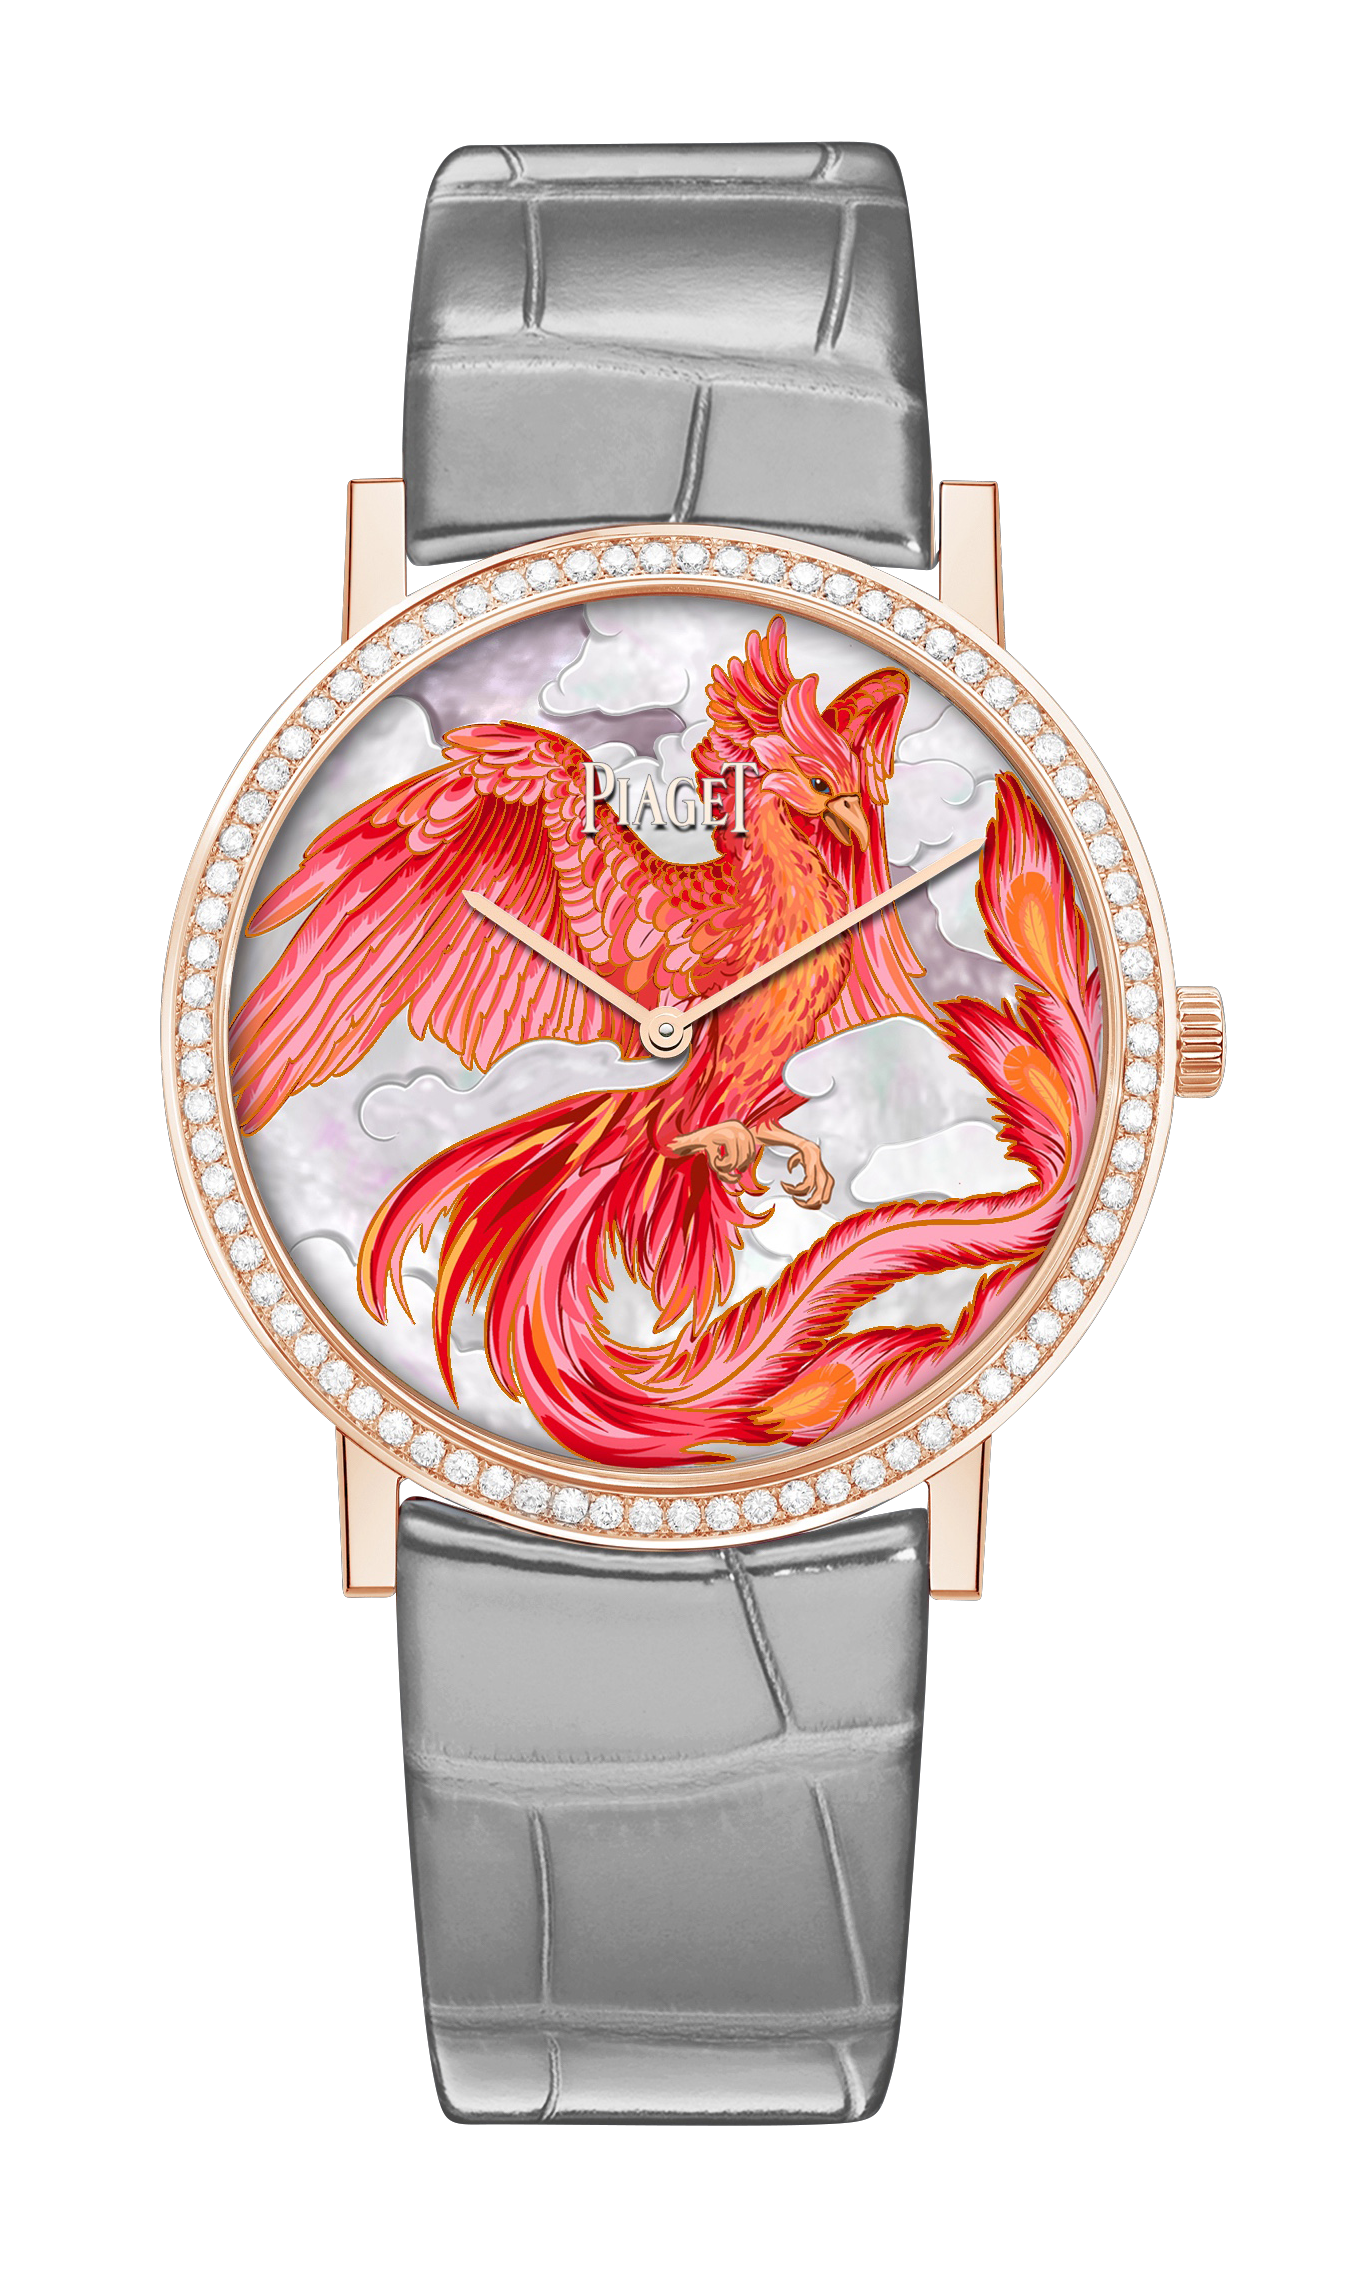 Piaget Lunar New Year Collection Lights Up With The Dragon And Phoenix